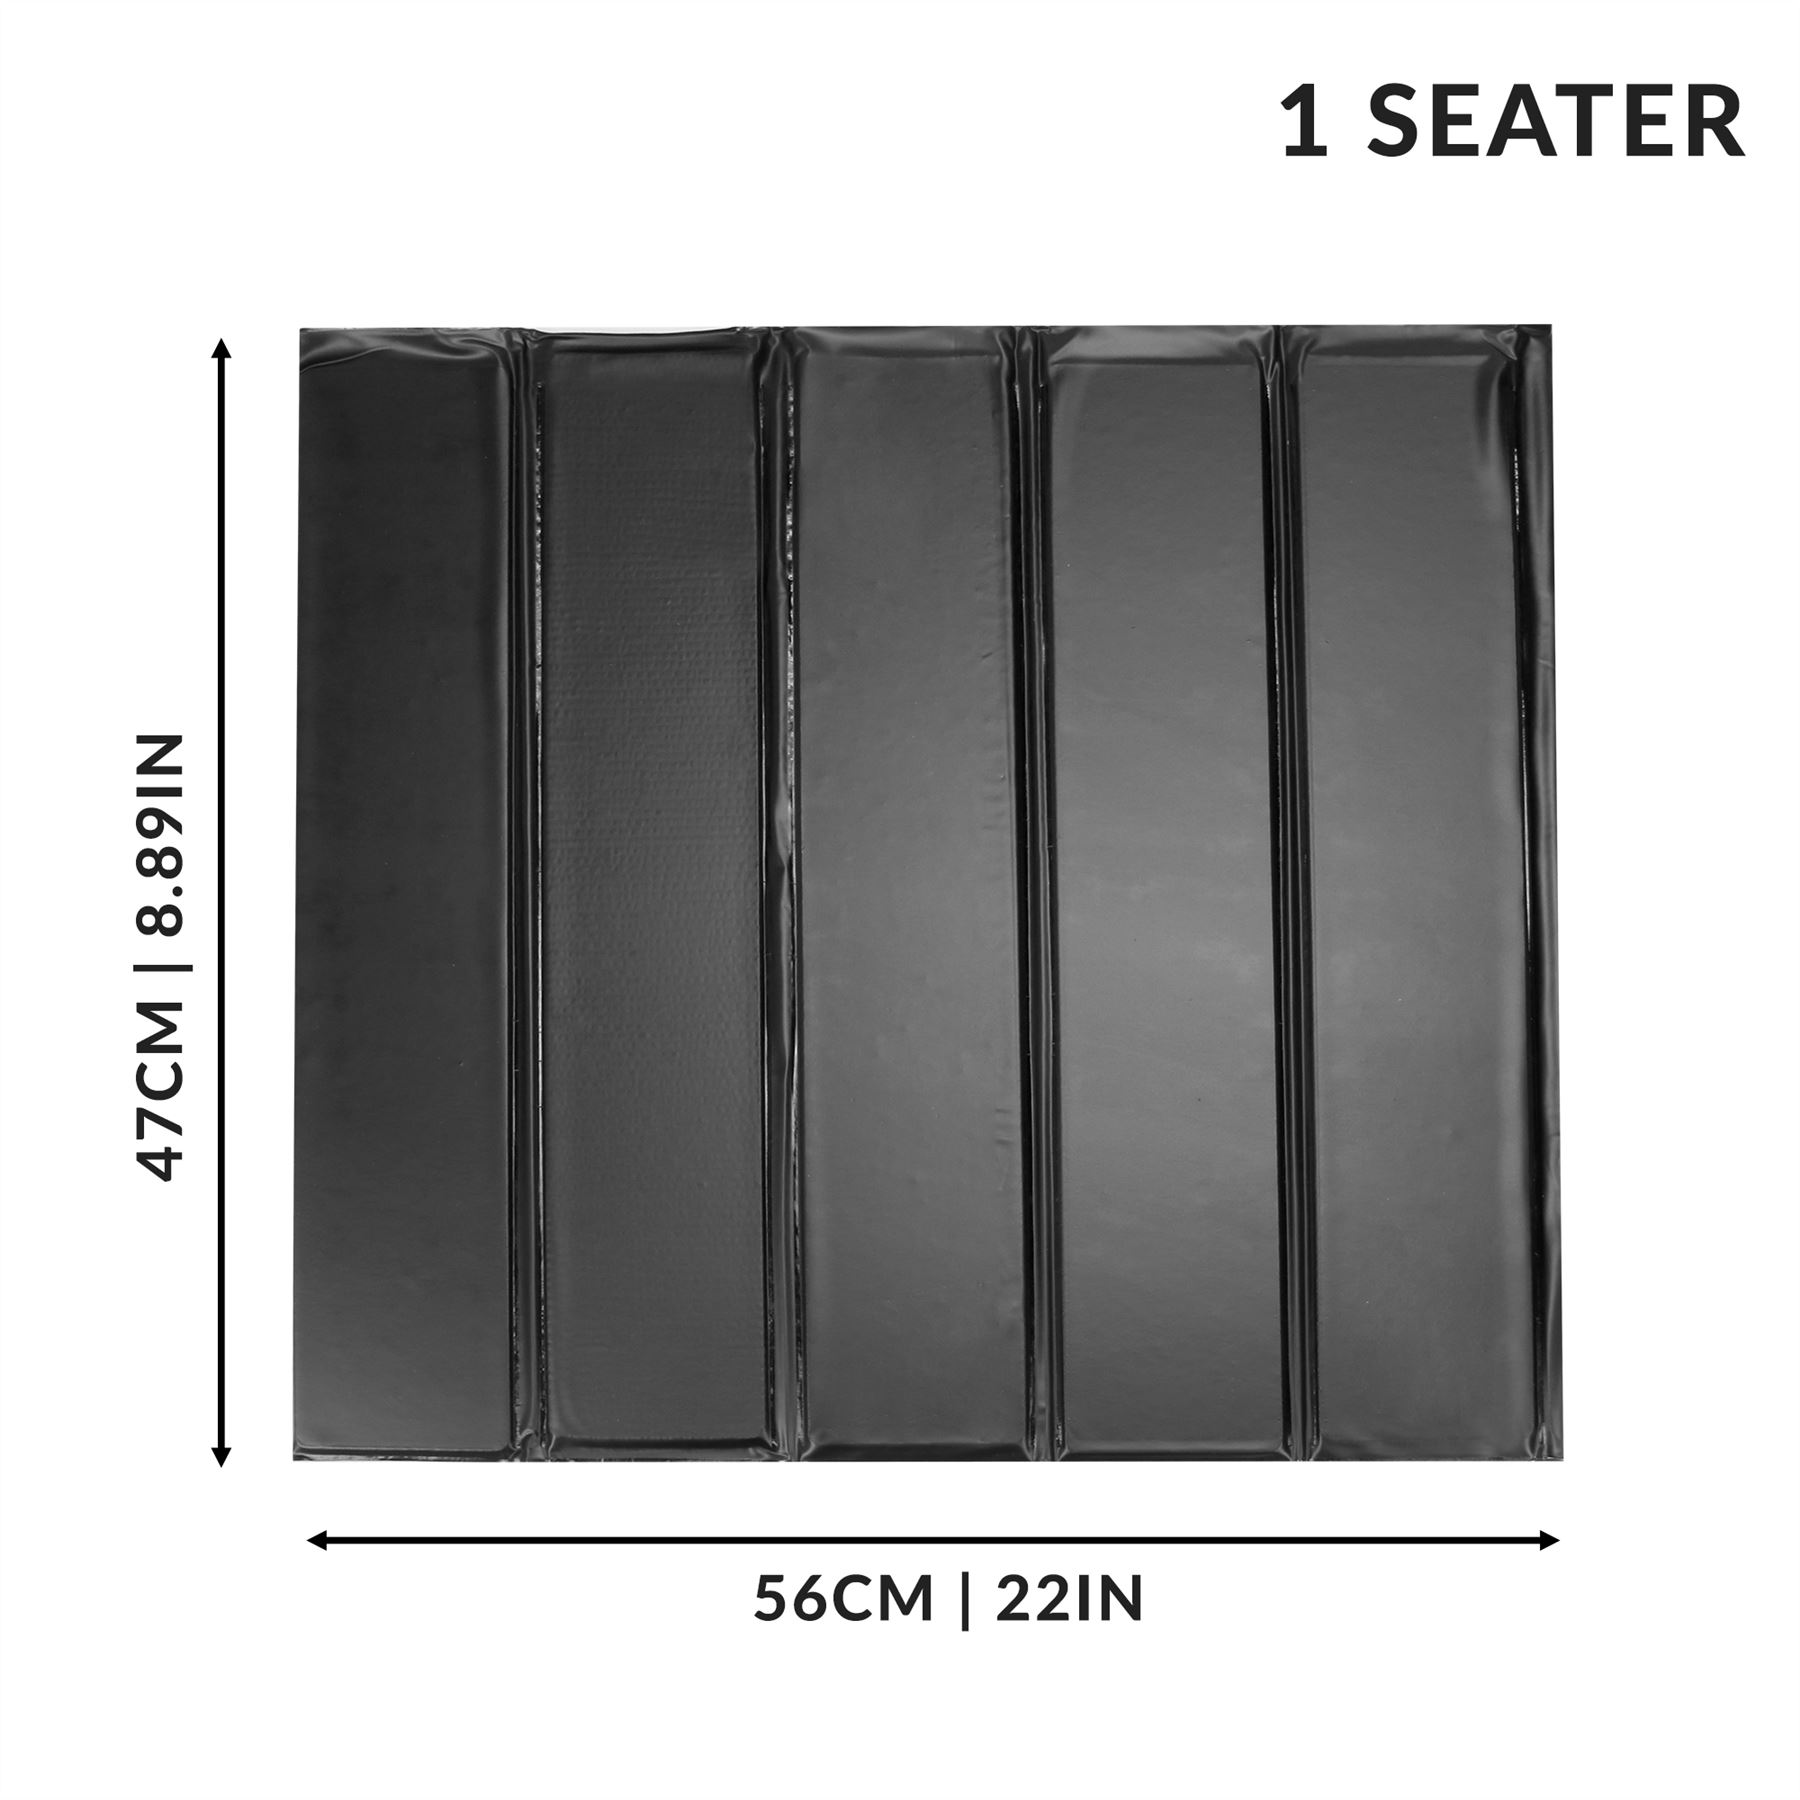 Sofa Protector Boards | 1 Seater | M&W